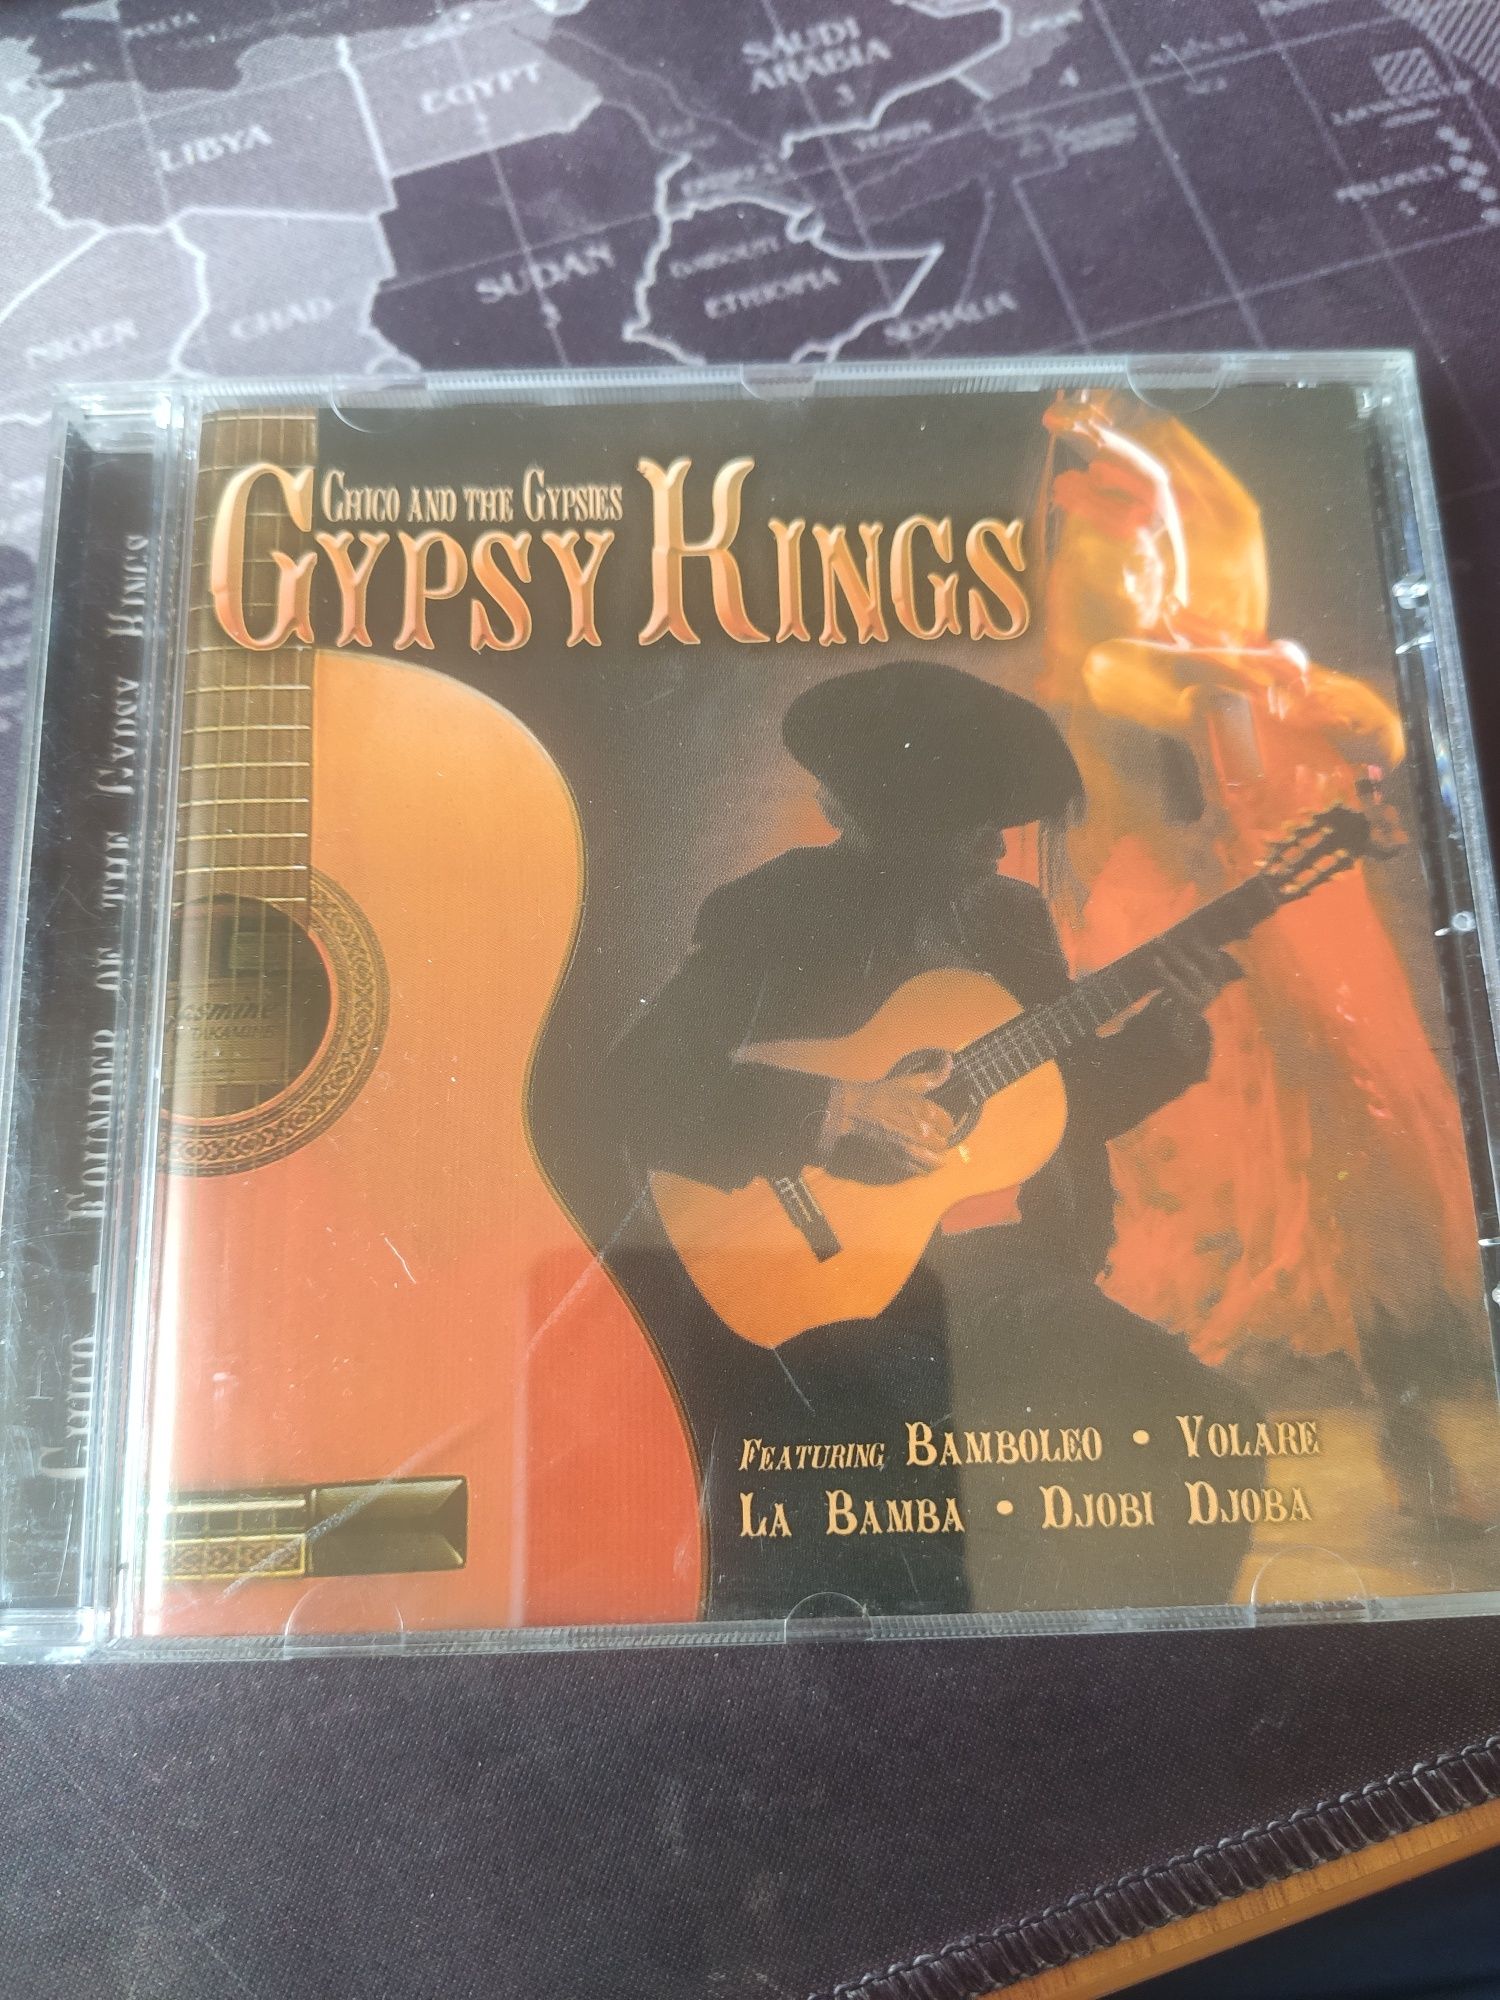 Gypsy kings Chico and the gypsies CD